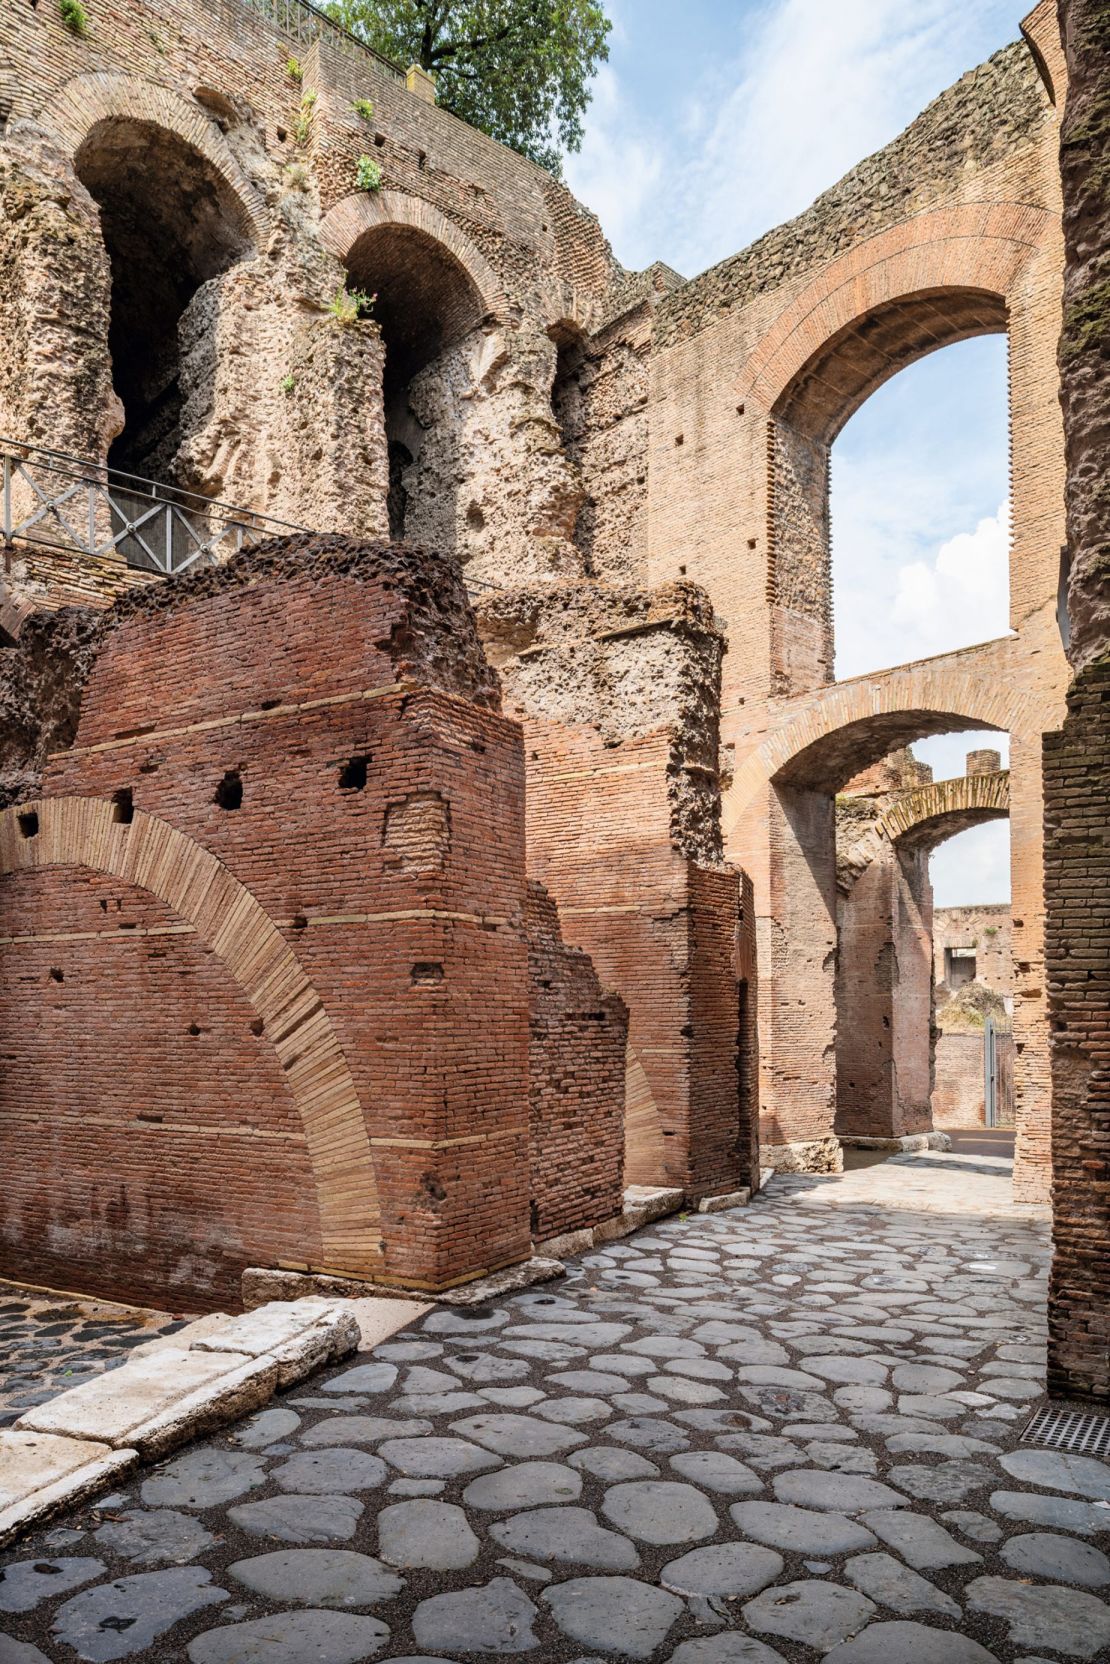 Some elements of the Domus Tiberiana complex have been painstakingly recreated by archaeologists.